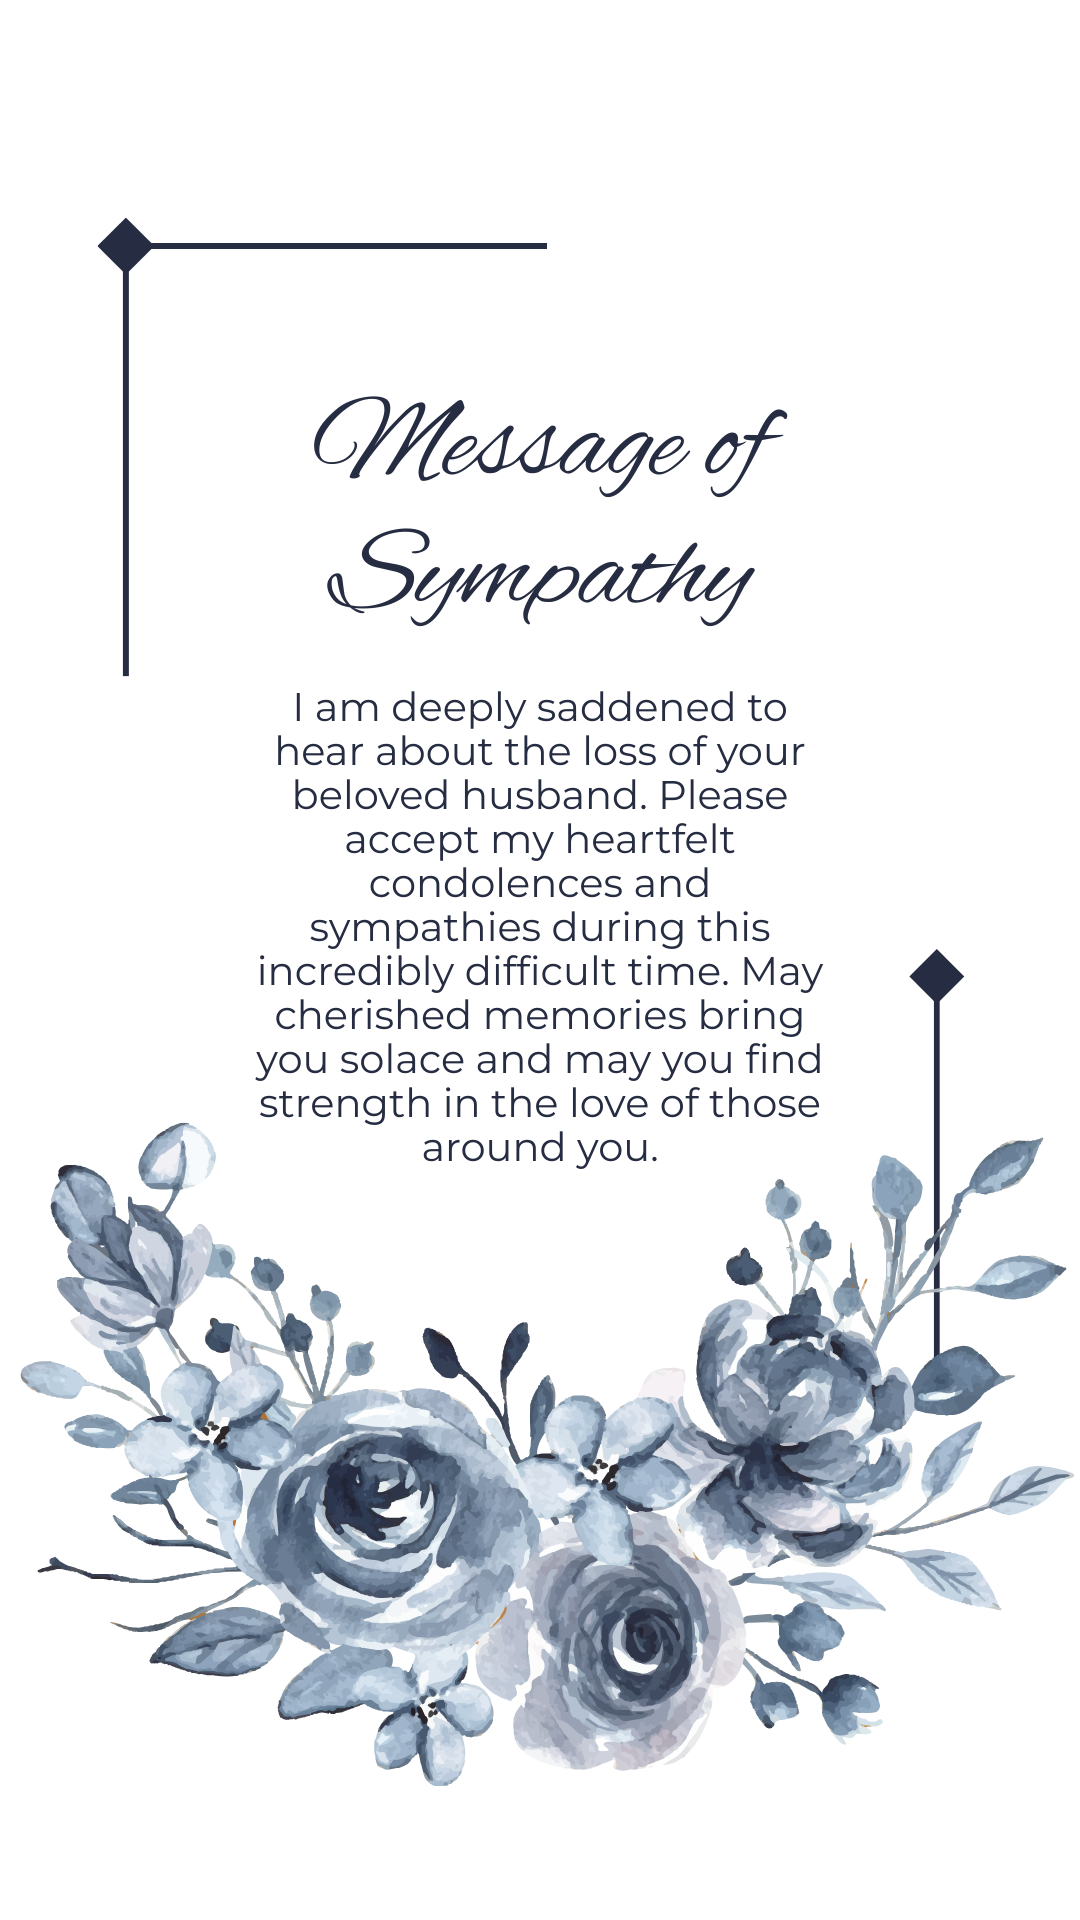 Sympathy message for loss of husband